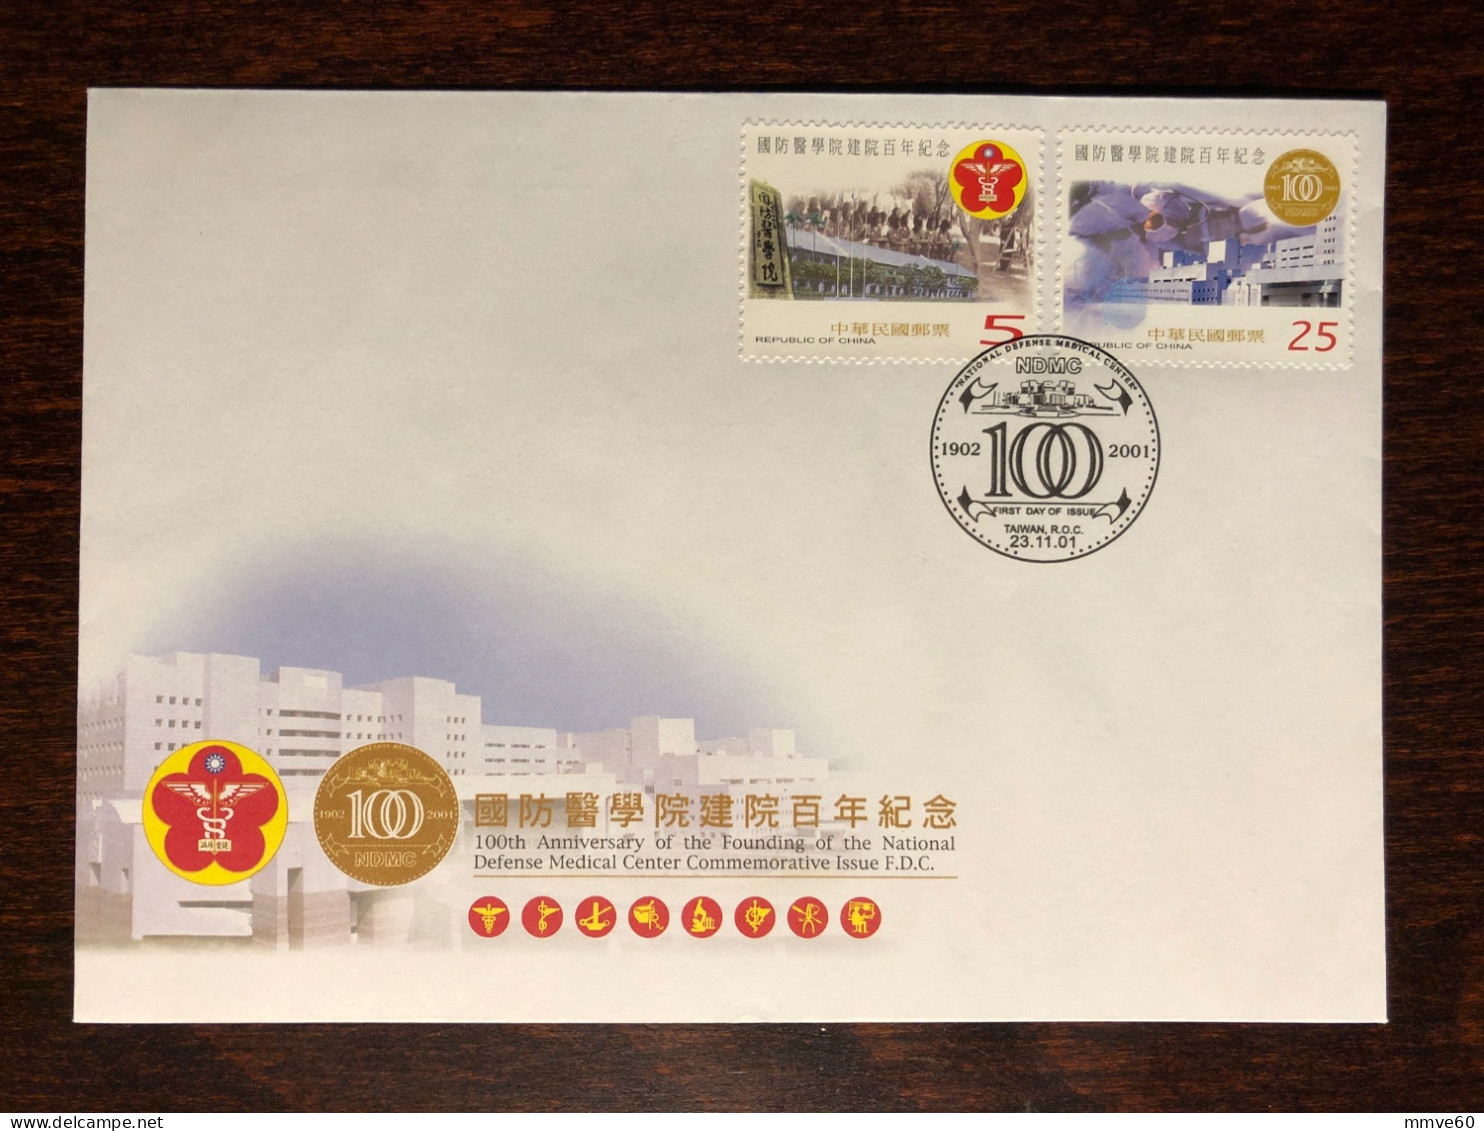 TAIWAN ROC FDC COVER 2001 YEAR MILITARY HOSPITAL HEALTH MEDICINE STAMPS - FDC